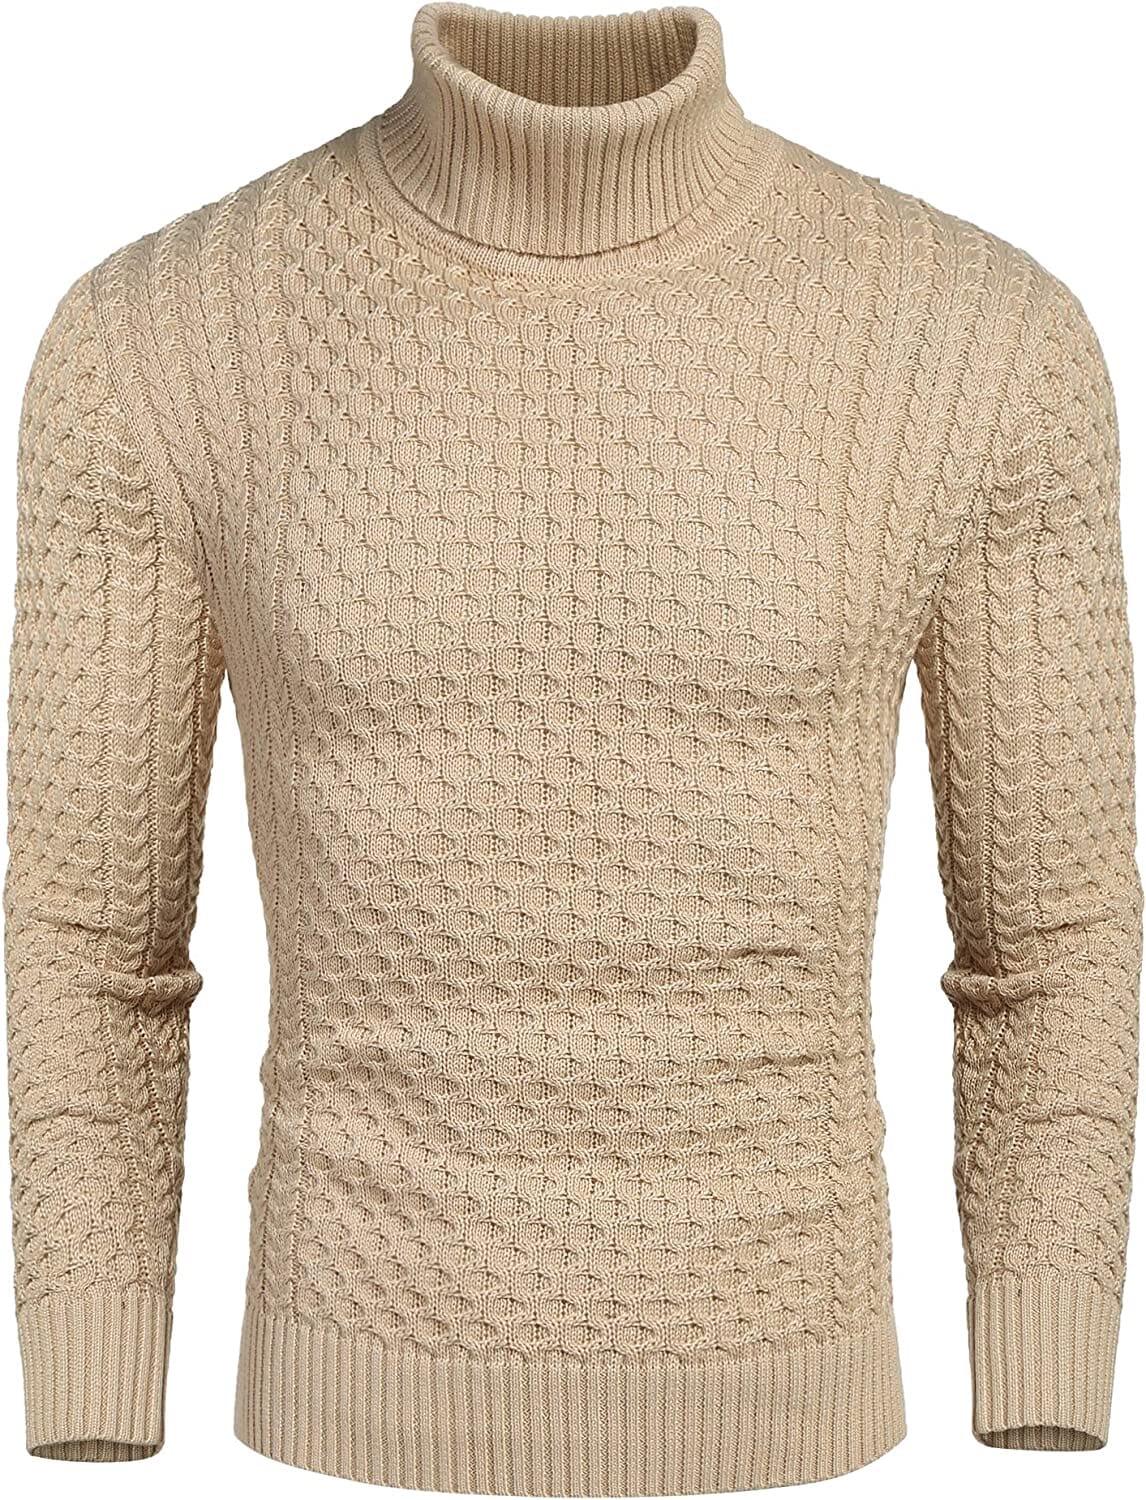 Slim Fit Turtleneck Twisted Sweater (US Only) Sweaters Coofandy's Khaki XS 